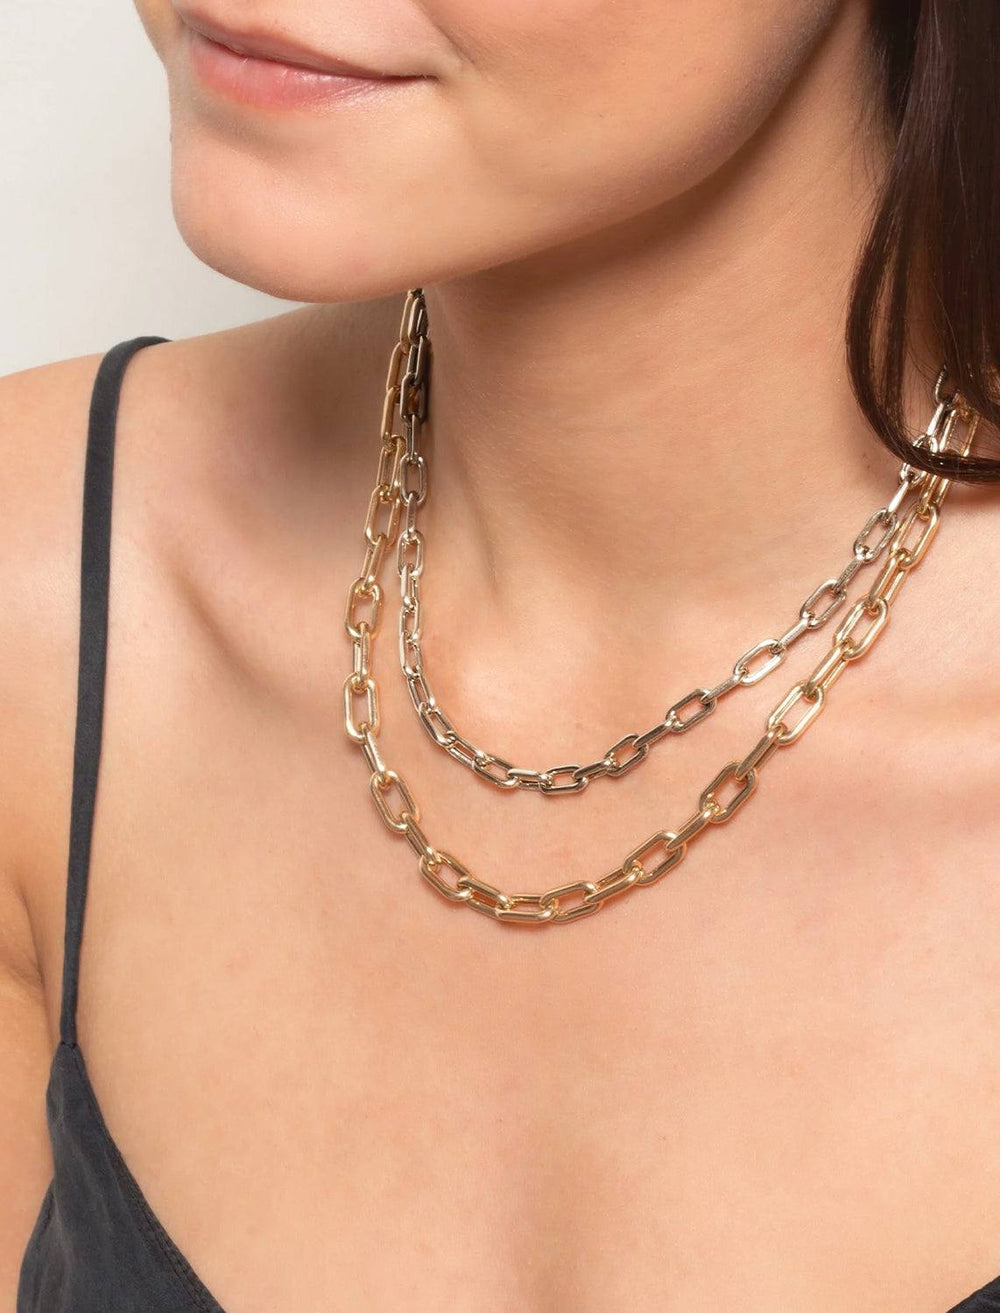 Model wearing Adina Reyter's 5.3mm wide 16" Italian chain link necklace in silver.